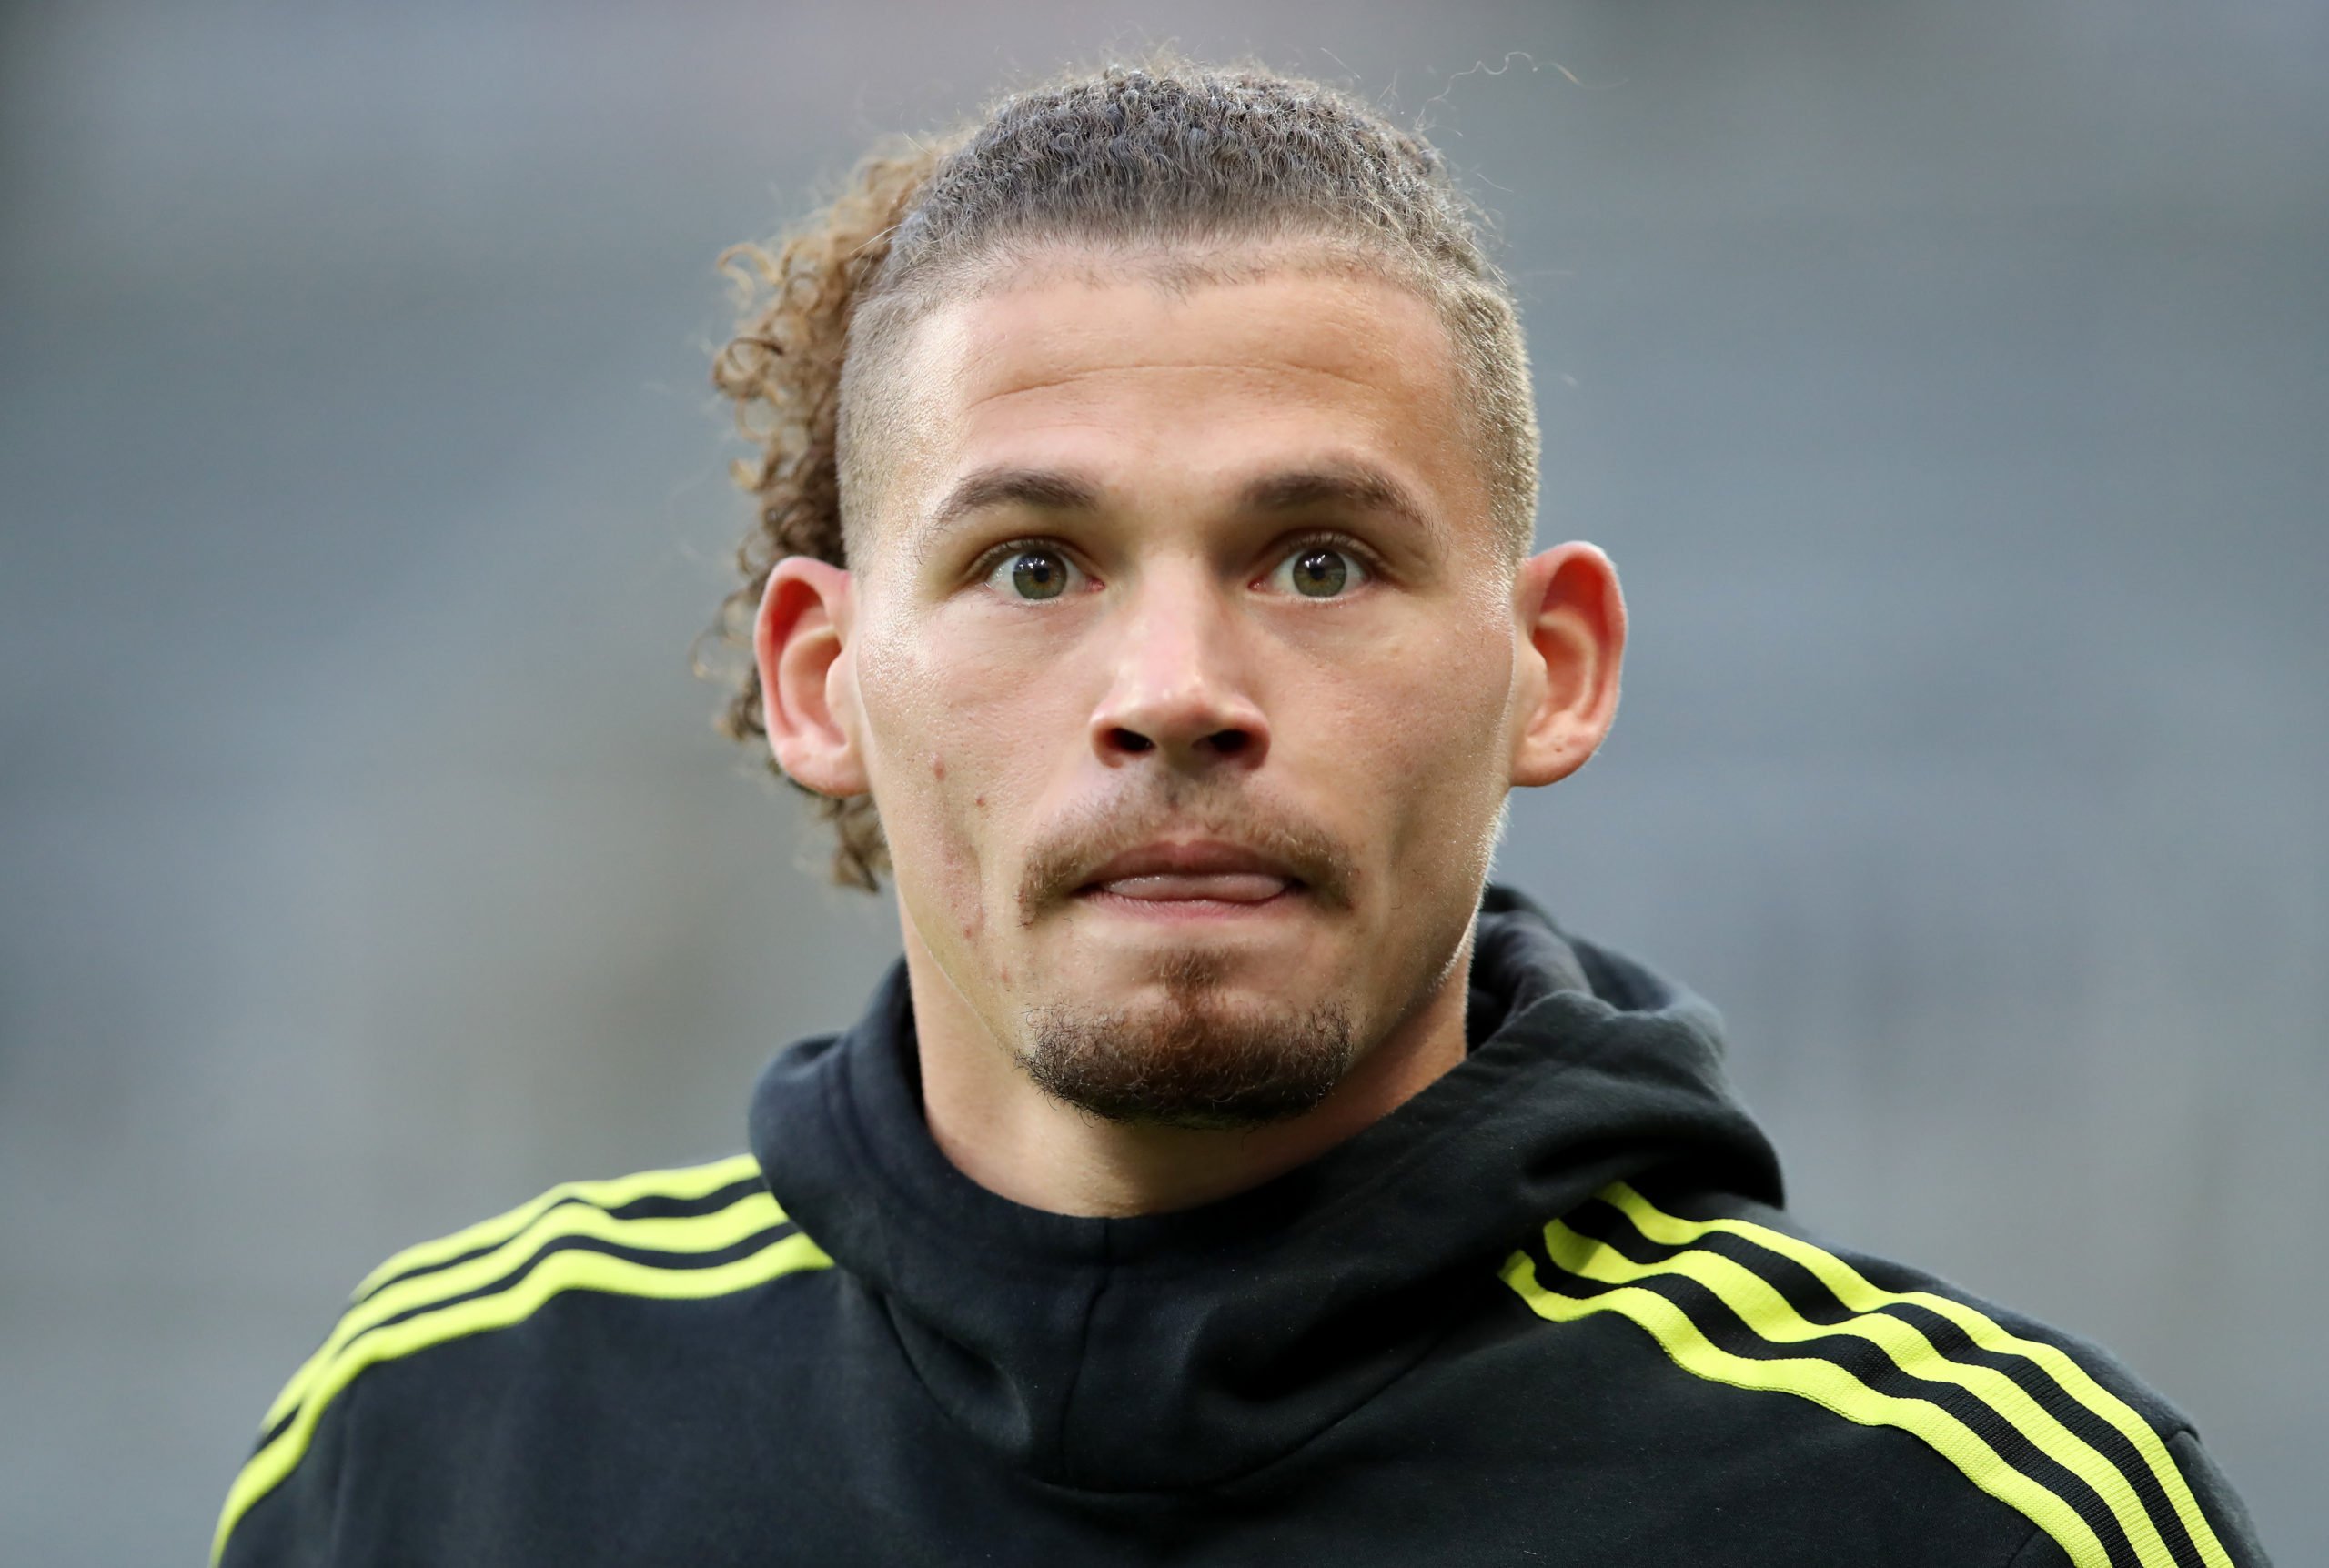 Agbonlahor has tipped Leeds United to sell Kalvin Phillips - What should Bielsa do?